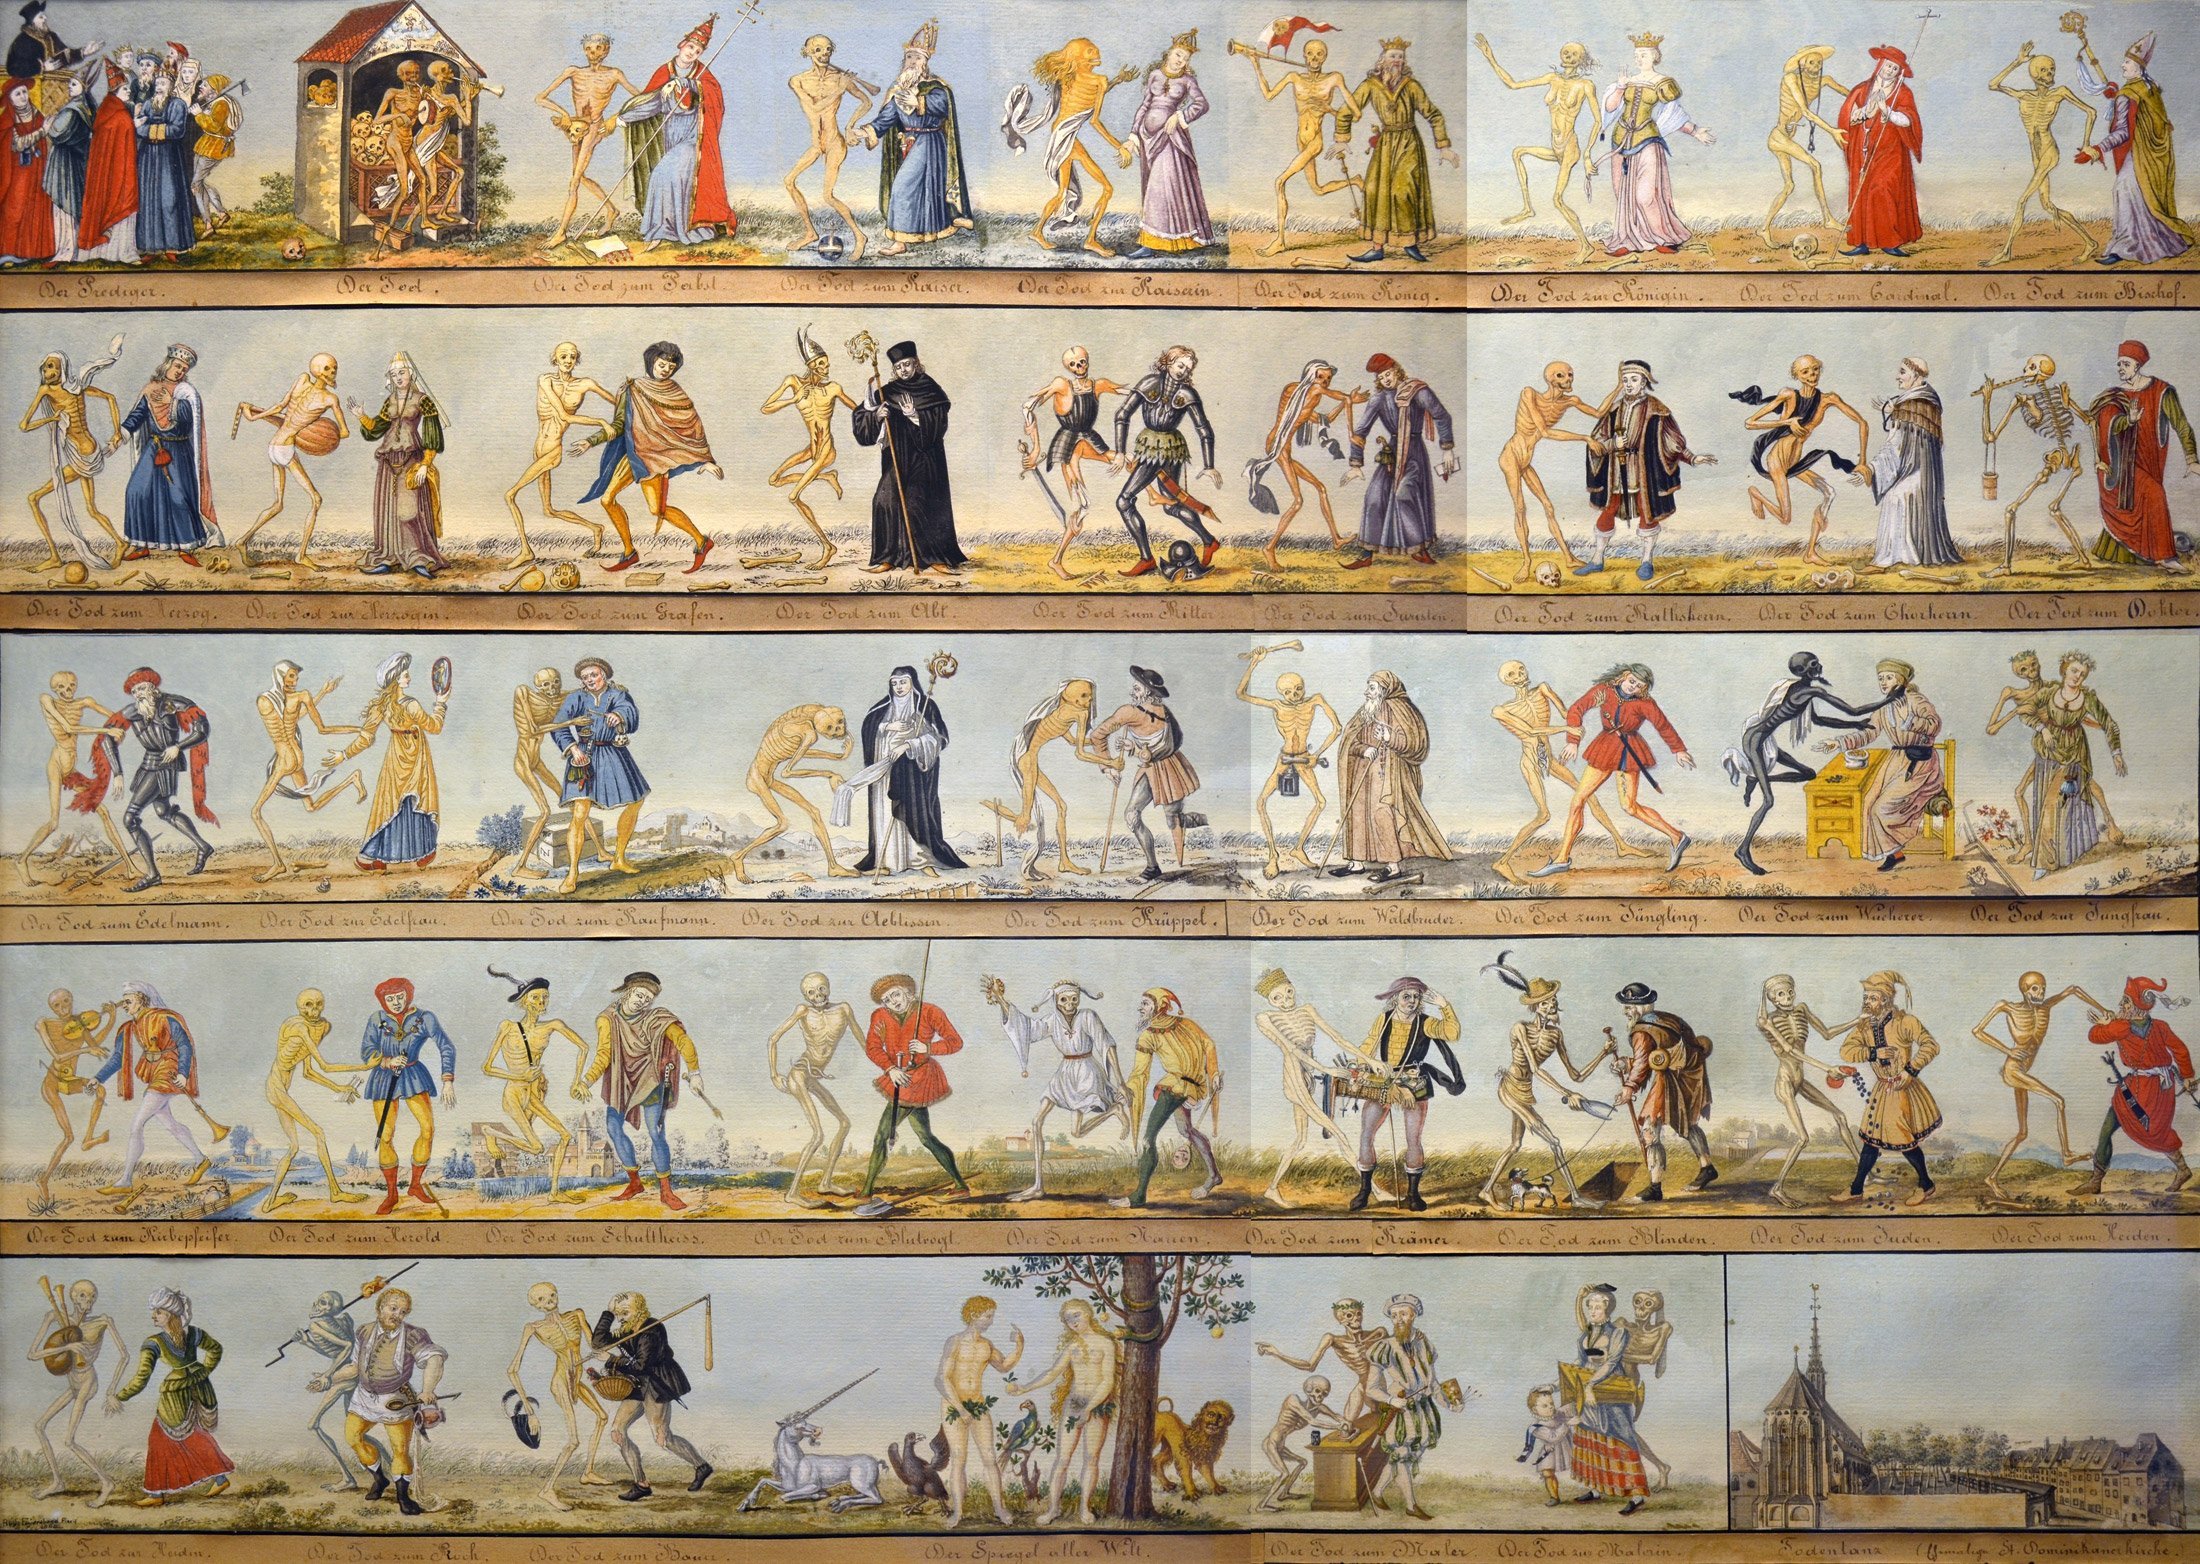 Reproduction on watercolour (1806) of the Dance of the Death of Basel, painted in 1440